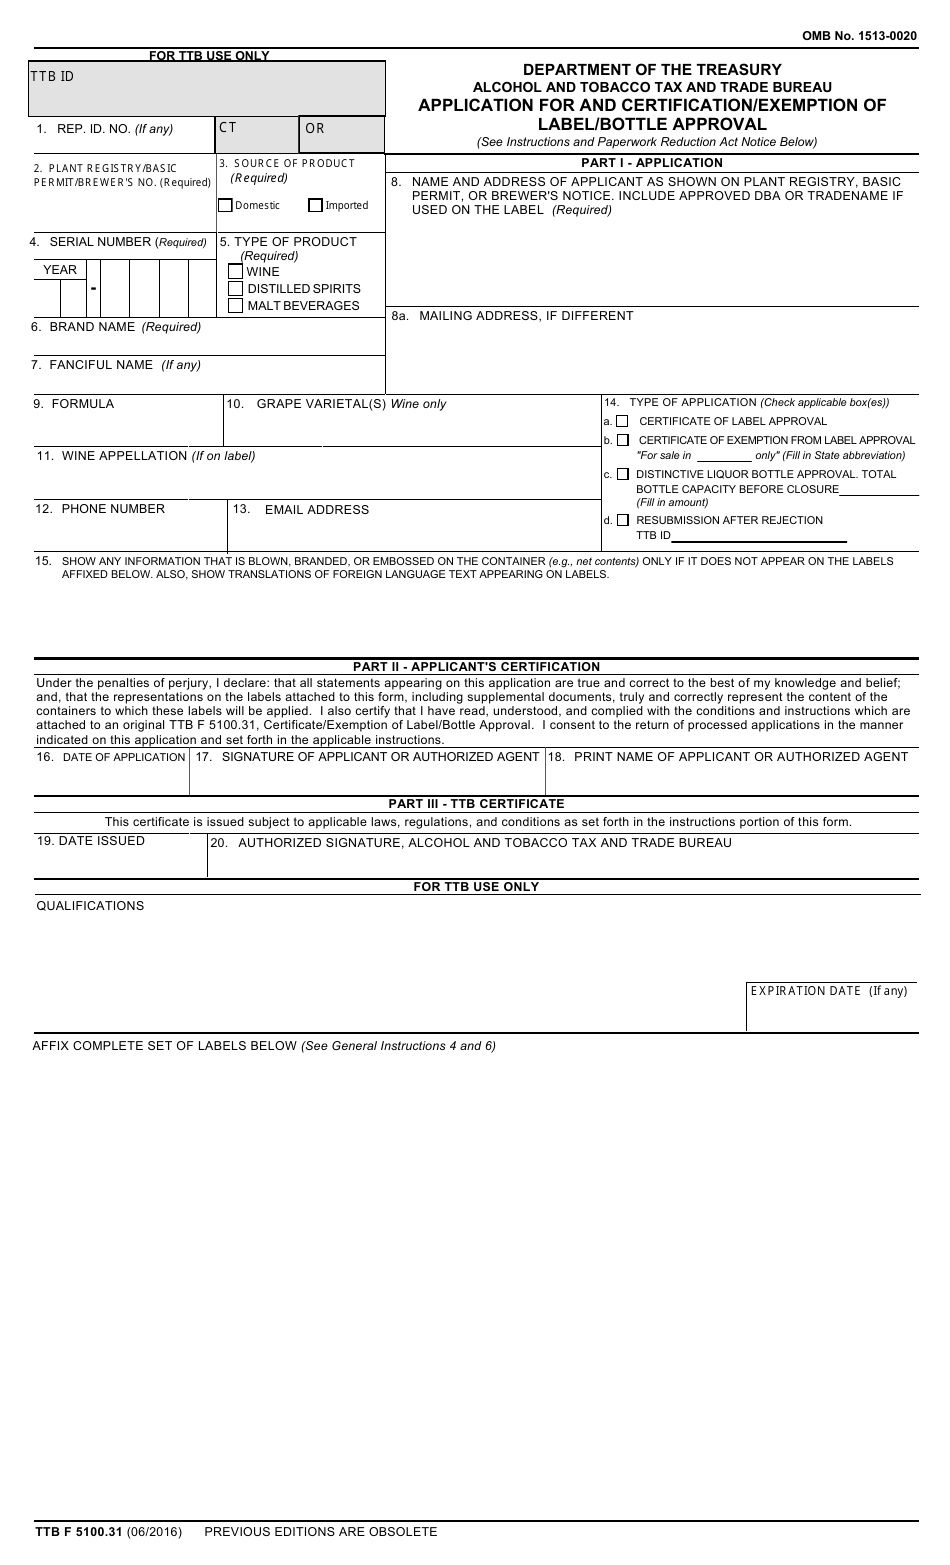 TTB Form 5100.31 Application for and Certification / Exemption of Label / Bottle Approval, Page 1